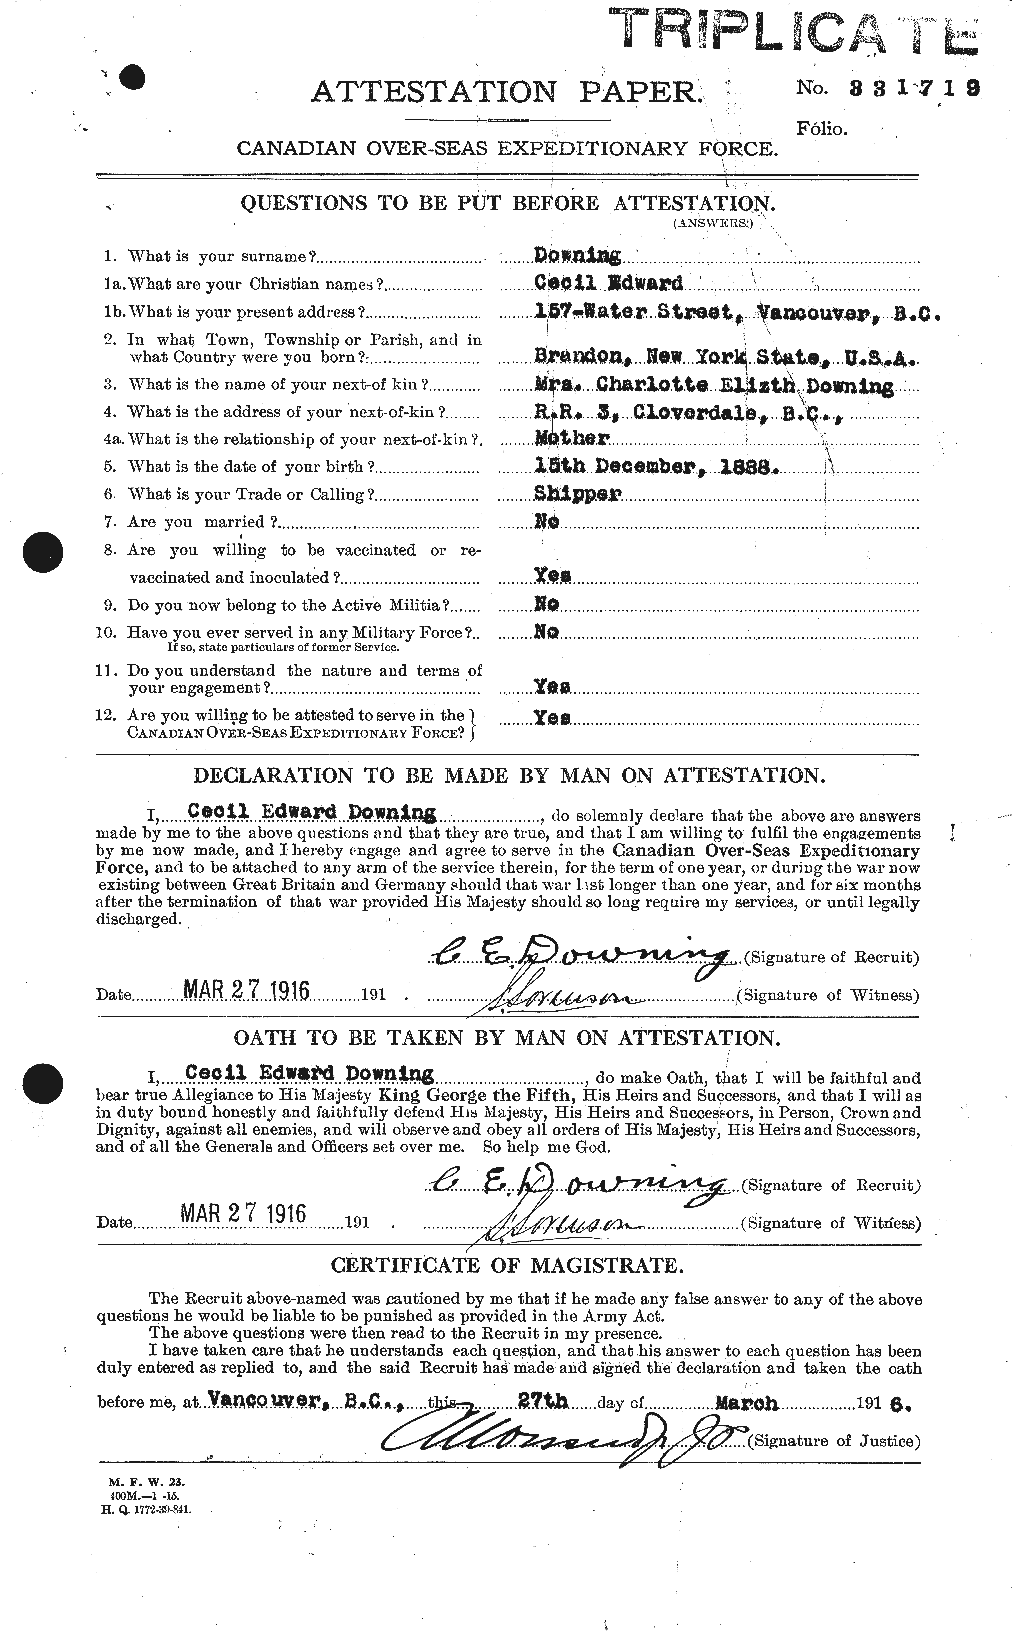 Personnel Records of the First World War - CEF 297229a